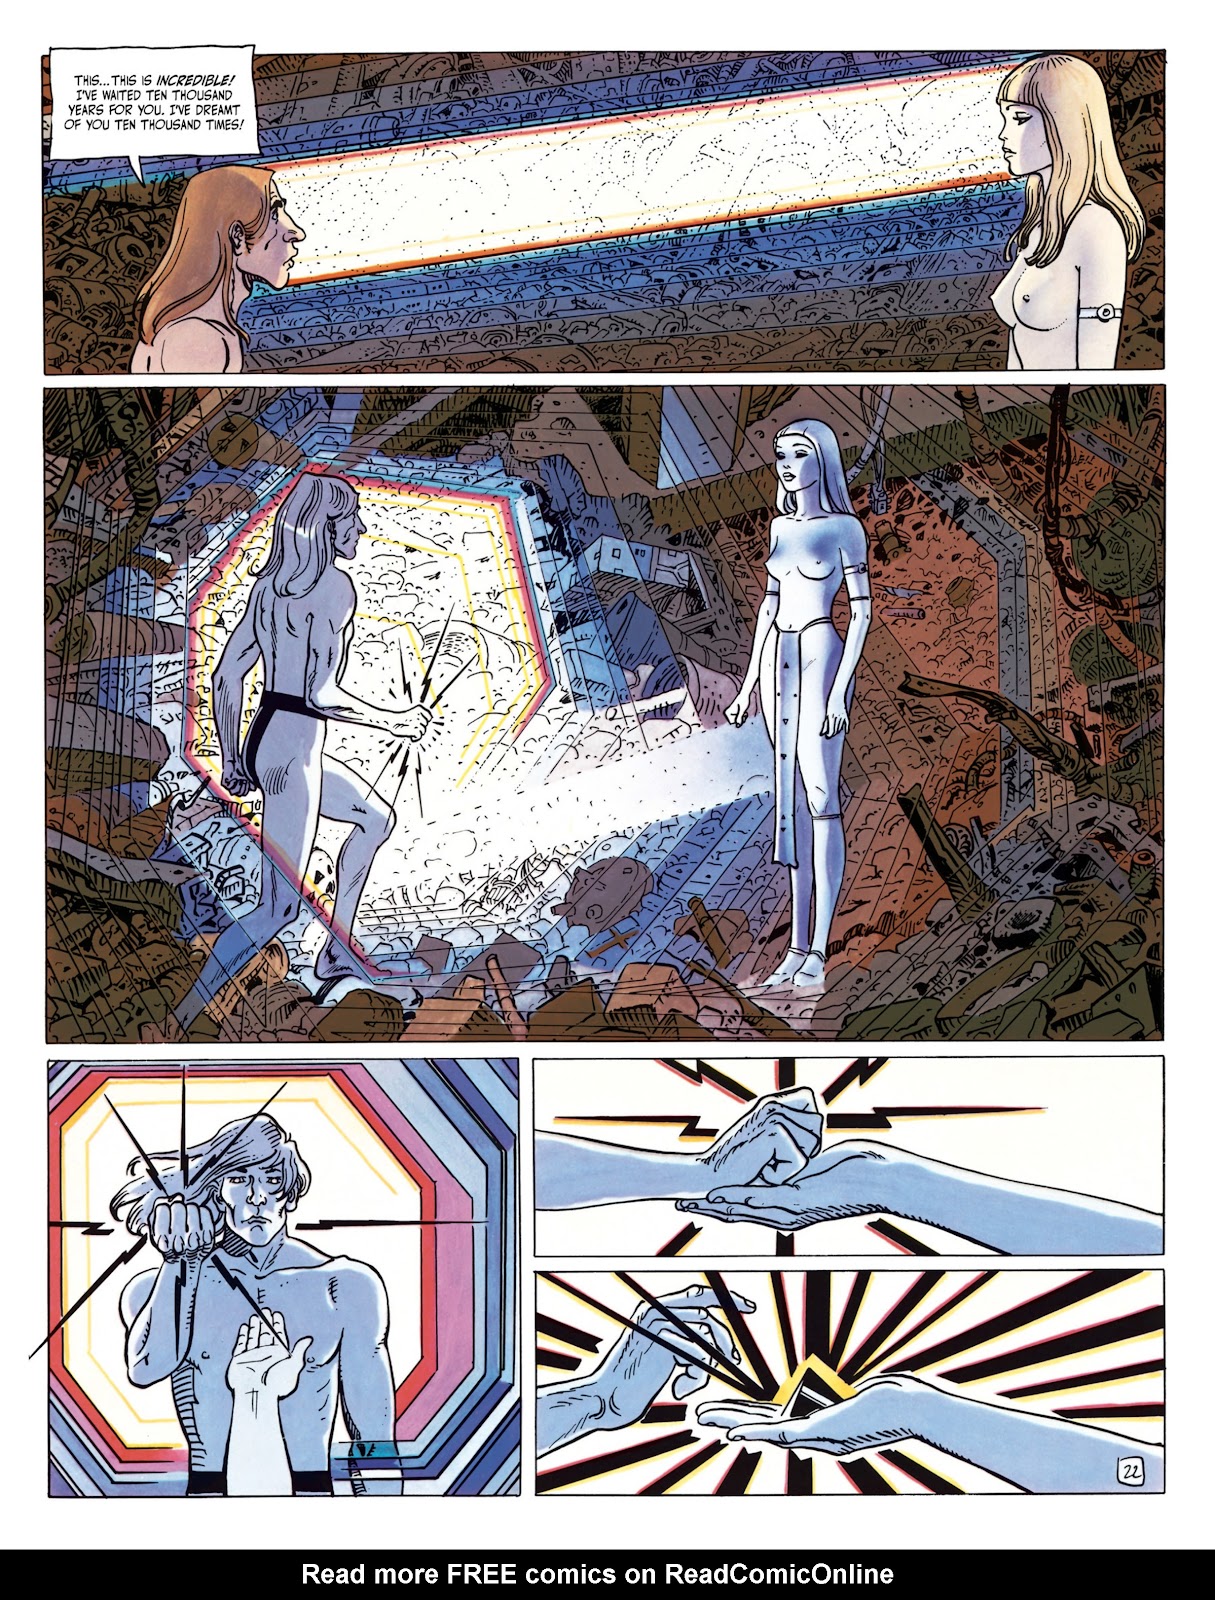 Page from The Incal. John DiFool, drawn in a more angular muscular style, ands over the Black Incal to Animah.